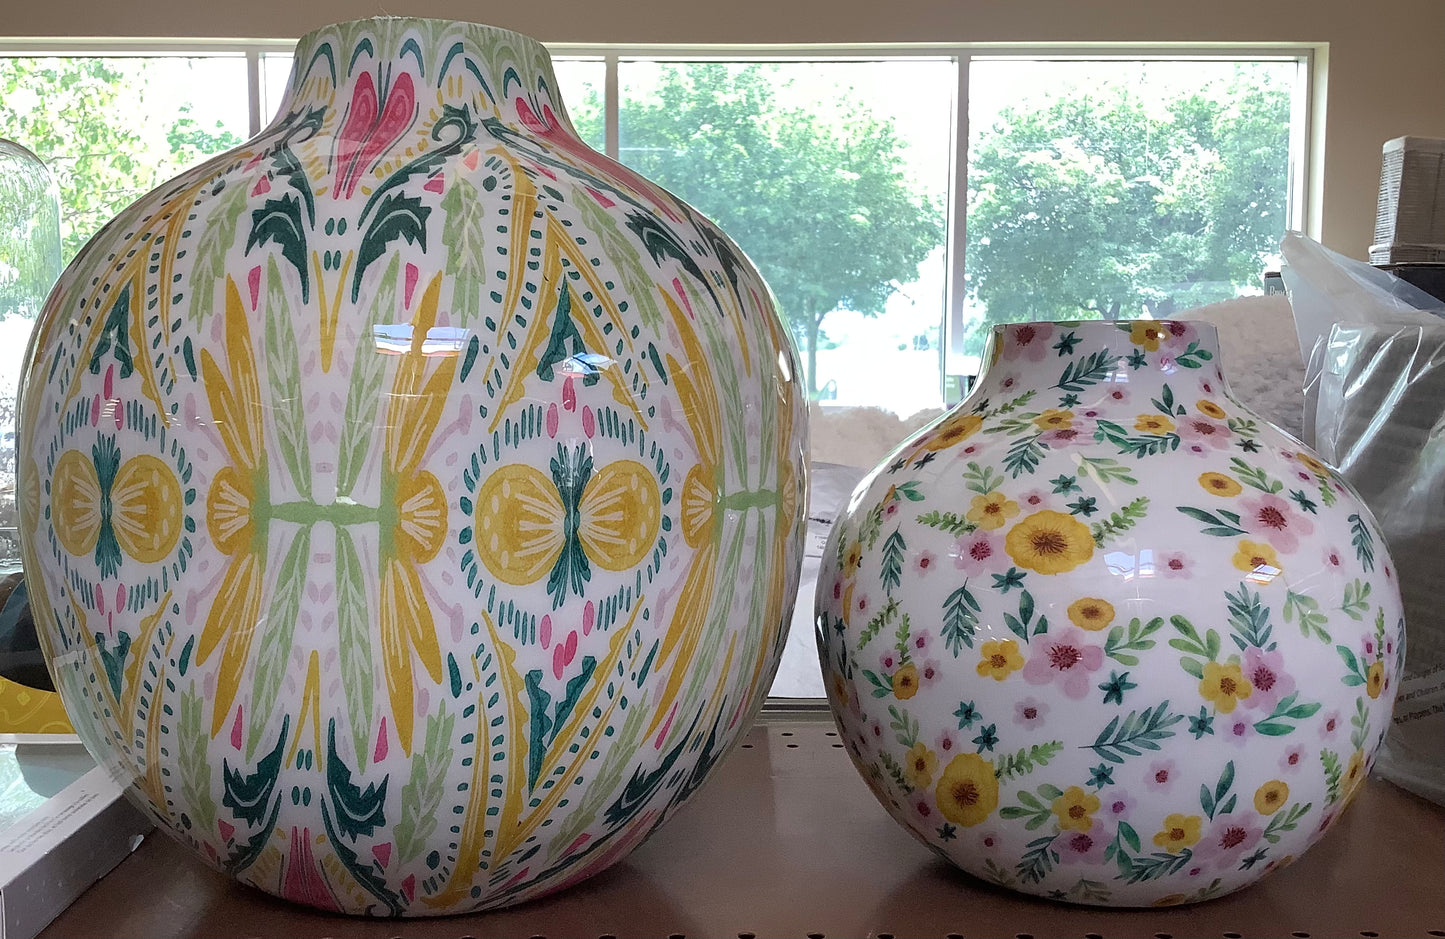 13"H Sullivans Abstract Floral Vase Set of 2, Multicolored